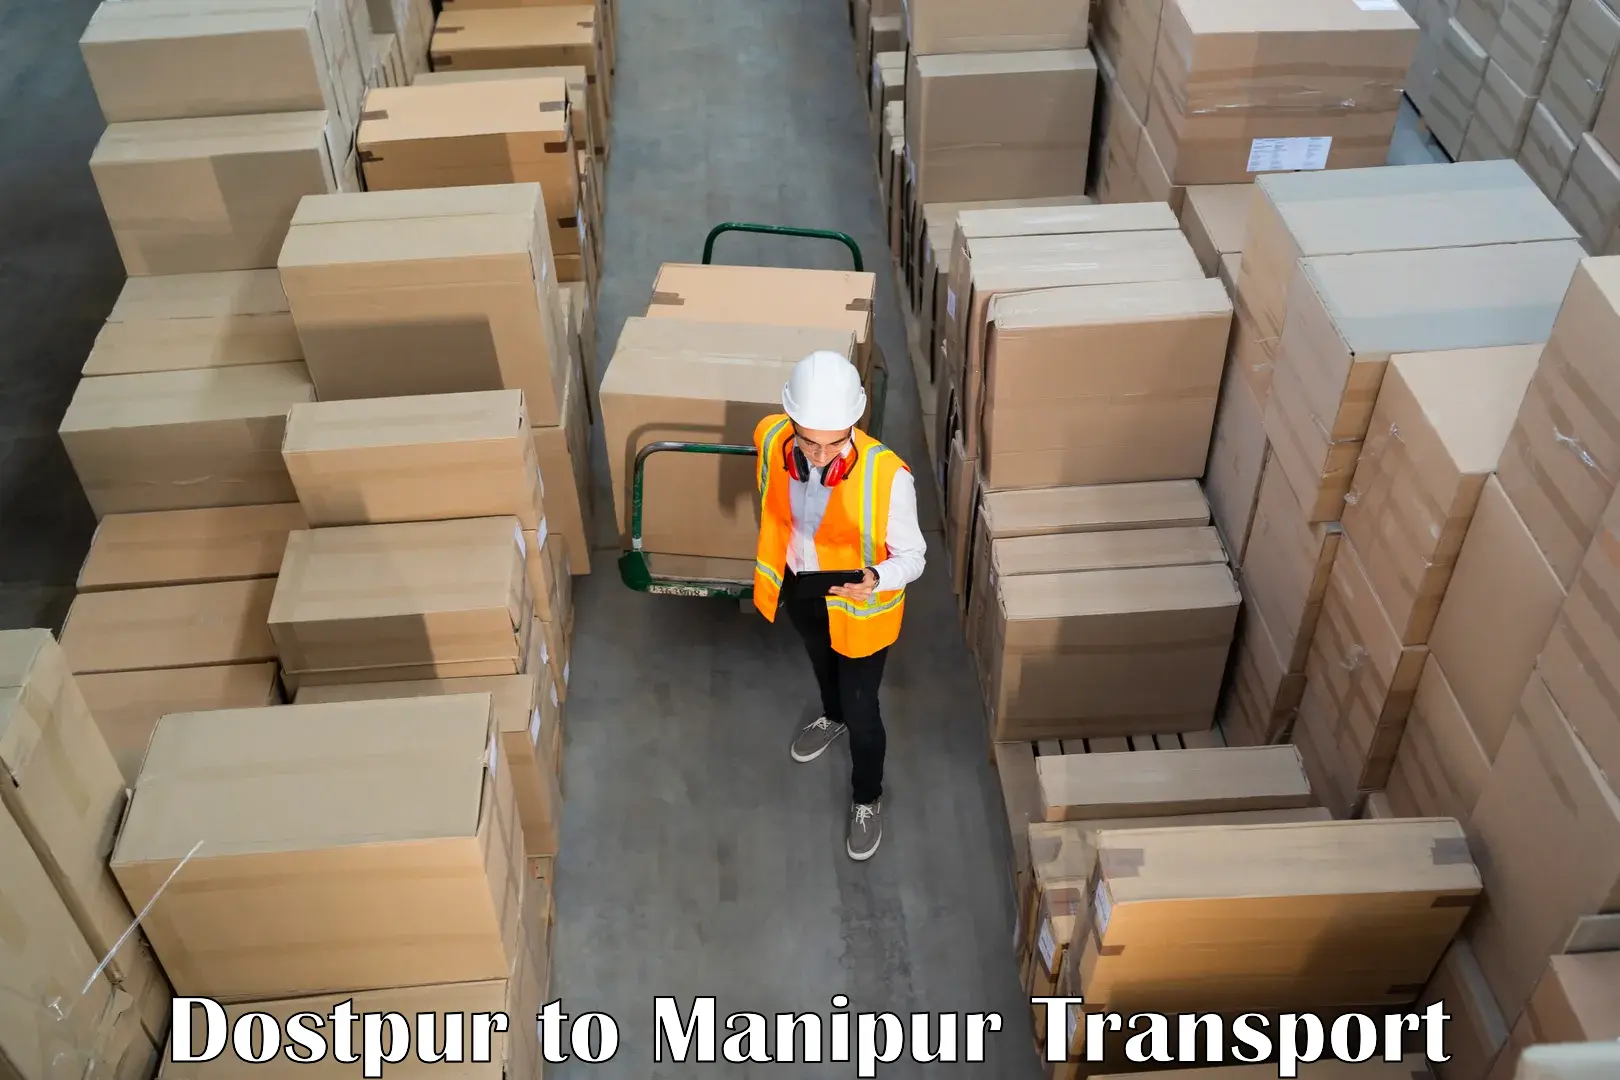 Daily transport service Dostpur to Manipur